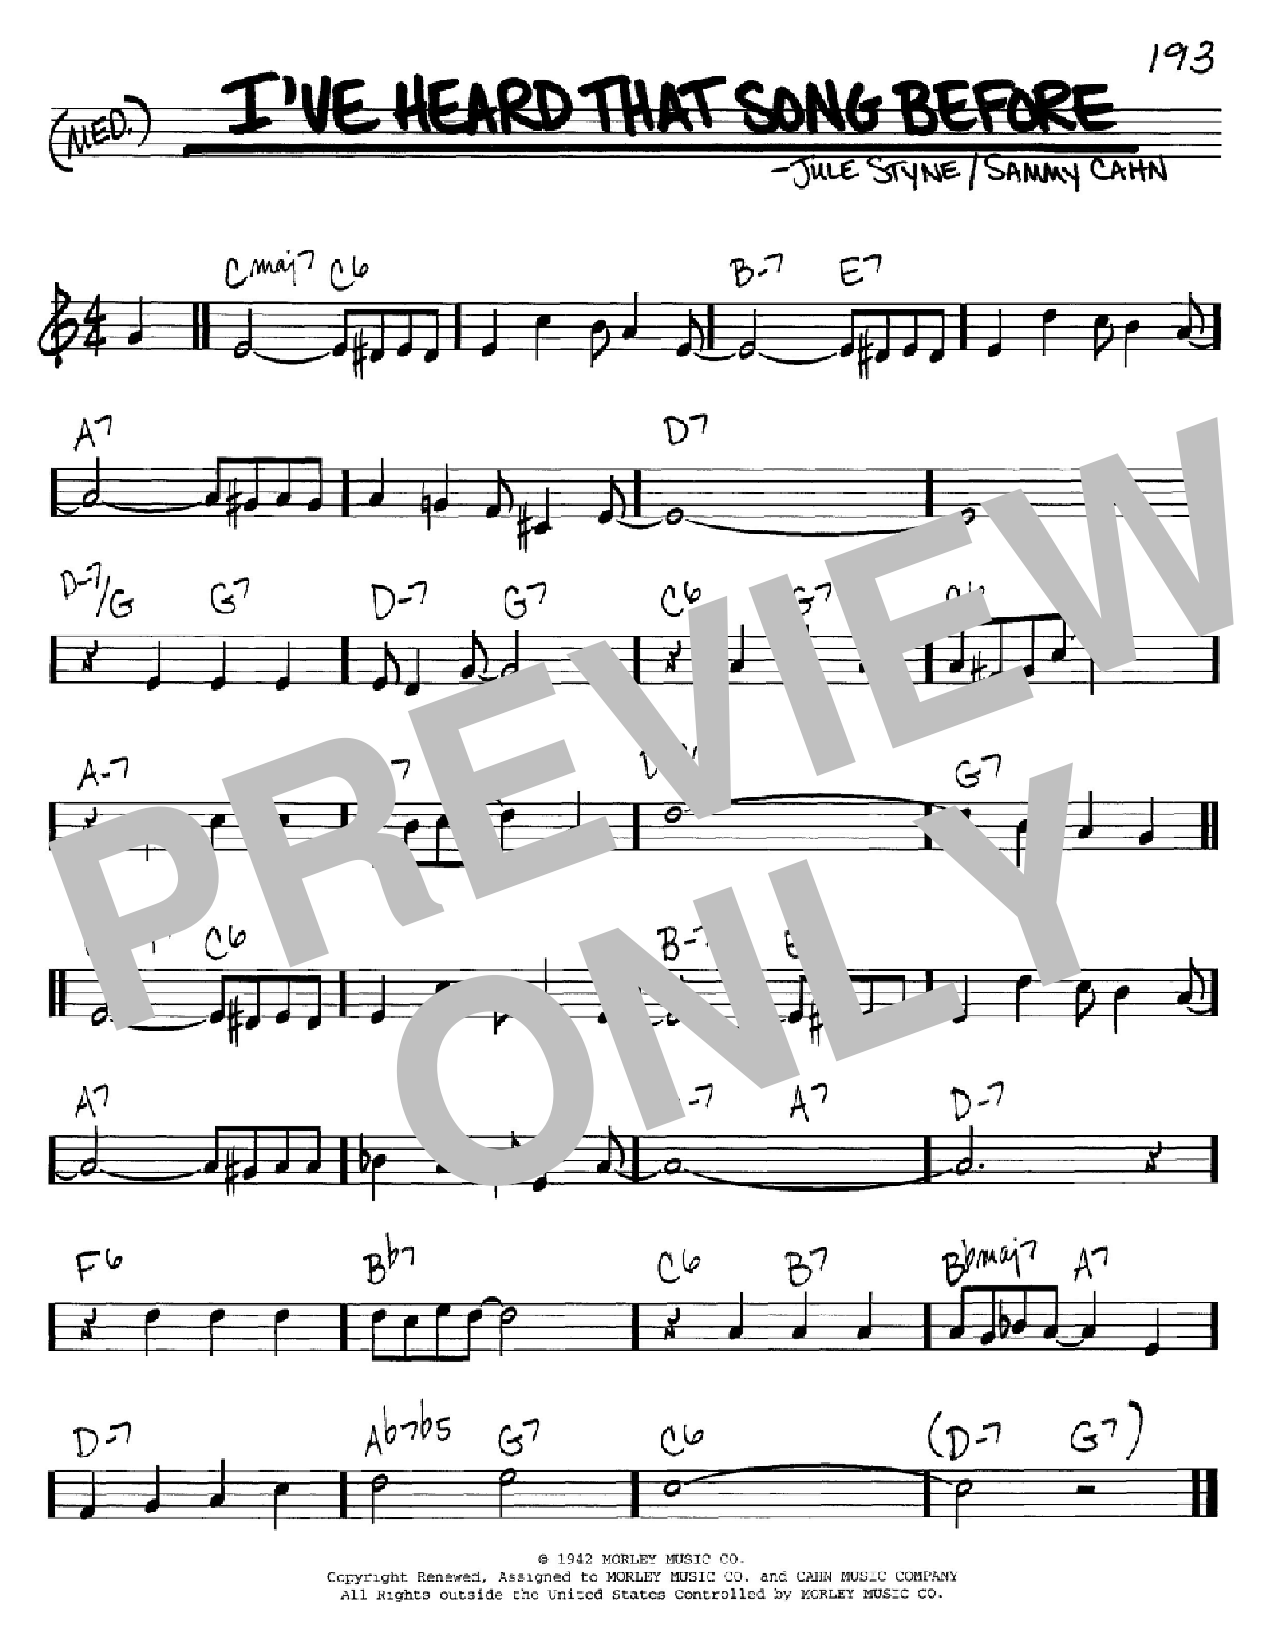 Sammy Cahn I've Heard That Song Before sheet music notes and chords. Download Printable PDF.